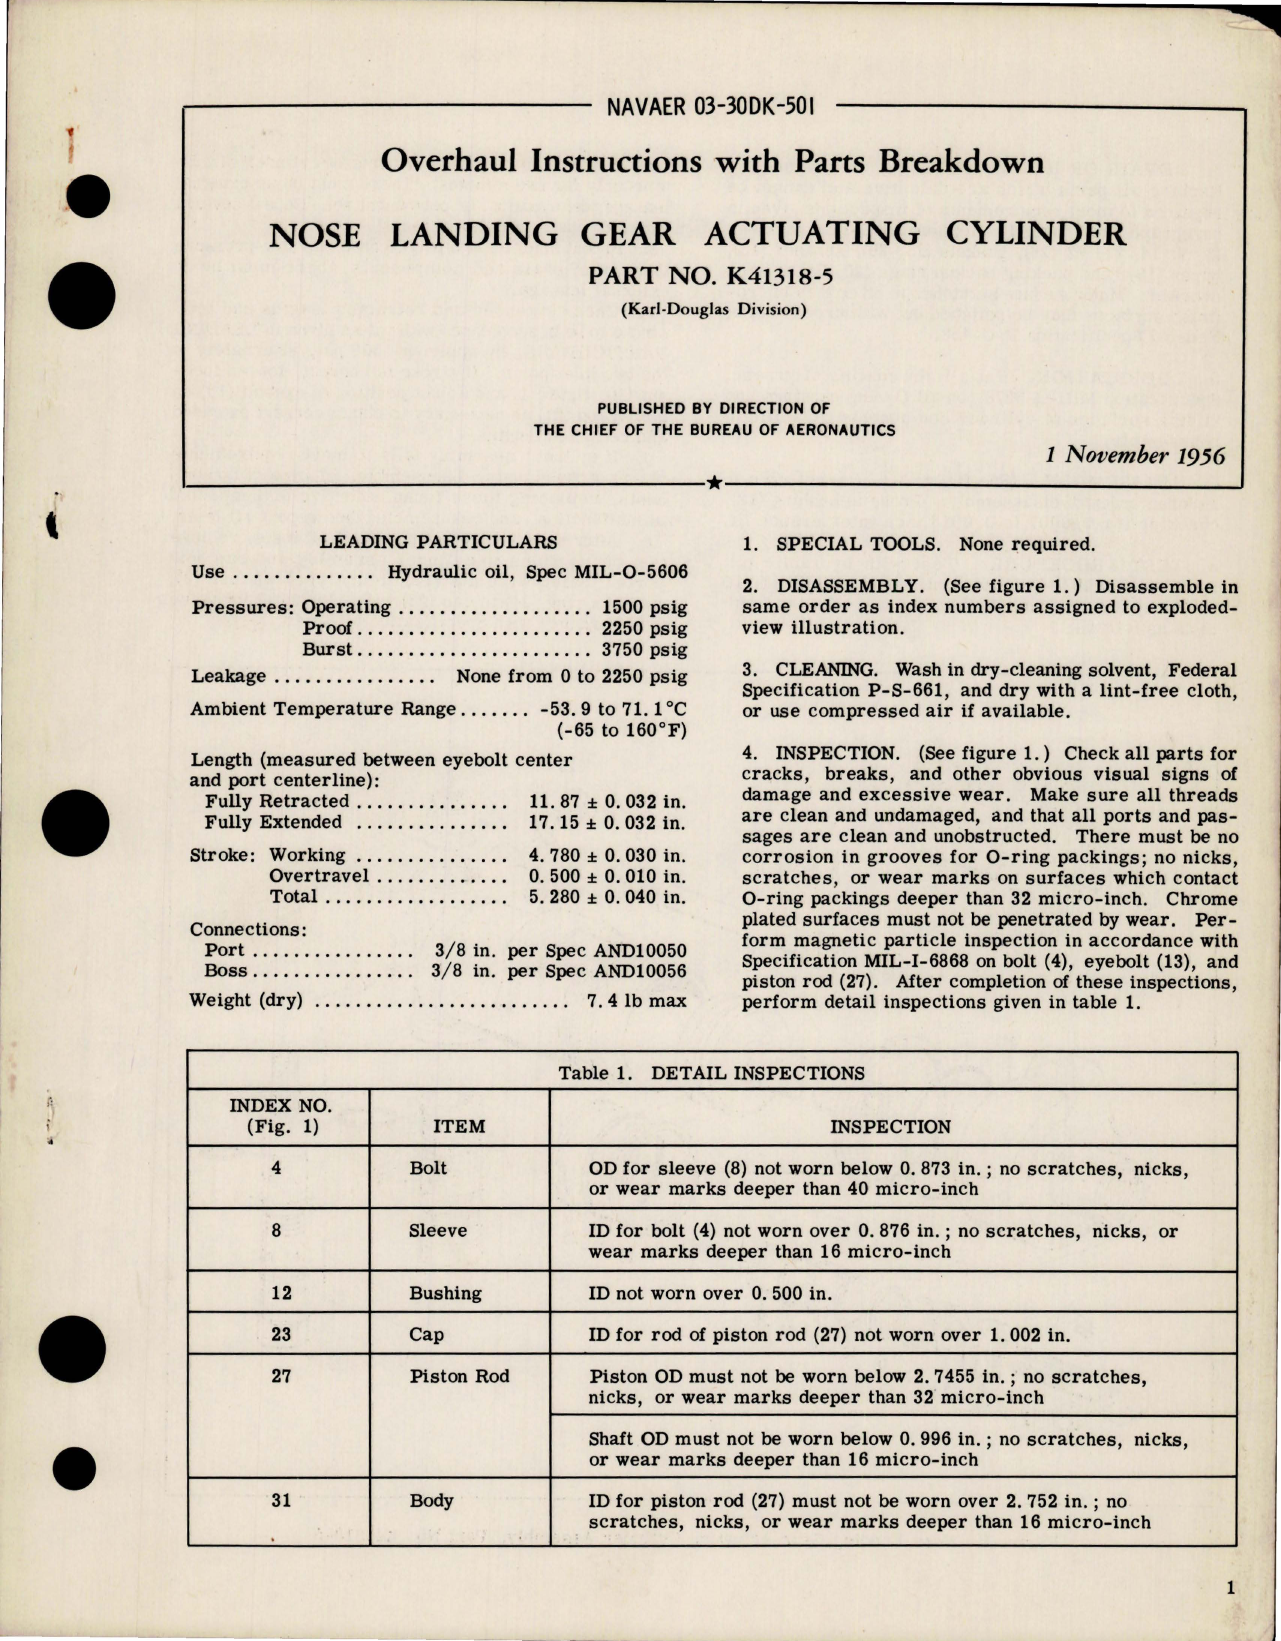 Sample page 1 from AirCorps Library document: Overhaul Instructions with Parts Breakdown for Nose Landing Gear Actuating Cylinder - Part K41318-5 